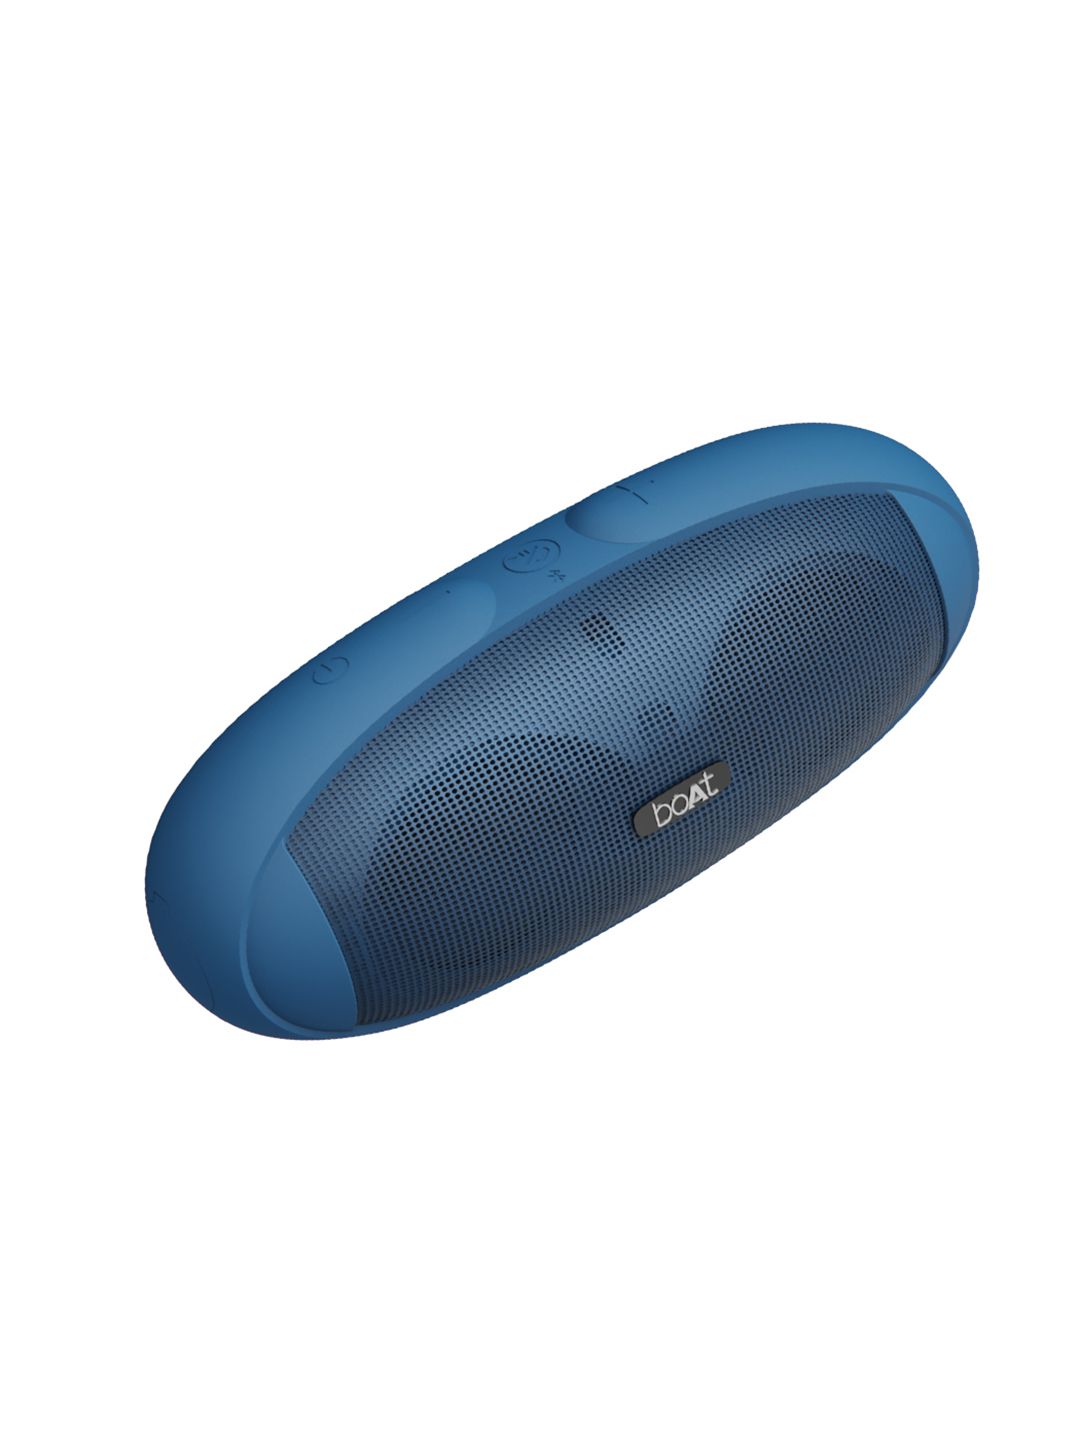 boAt Blue Rugby Plus M 16W Bluetooth Speaker Price in India